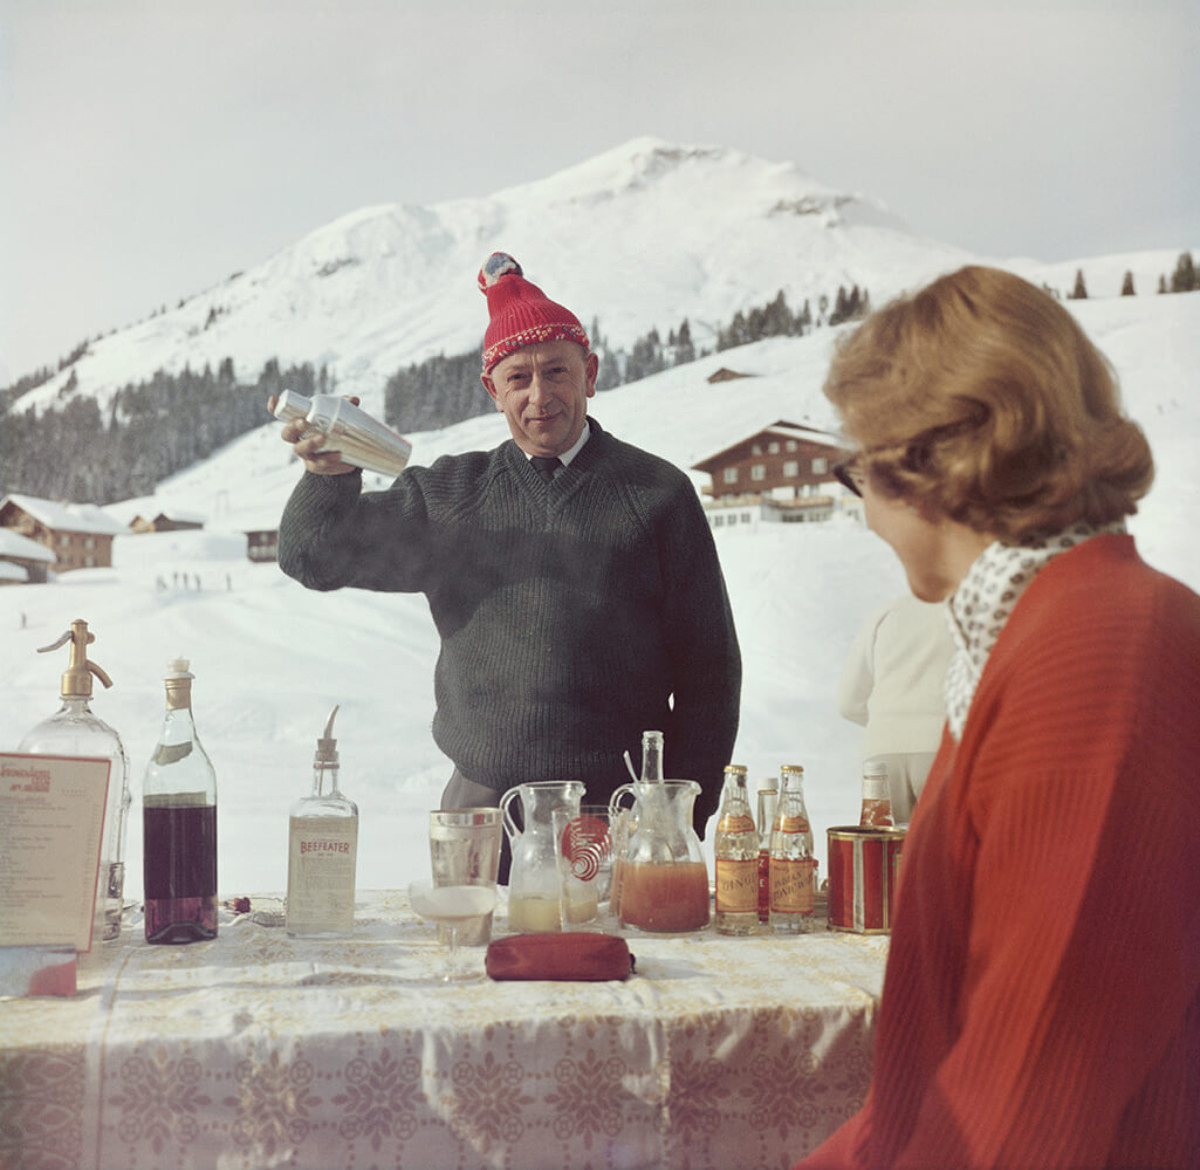 A bartender mixes a drink for a customer at the Ice Bar at the Hotel Krone in Lech, Austria, 1960.